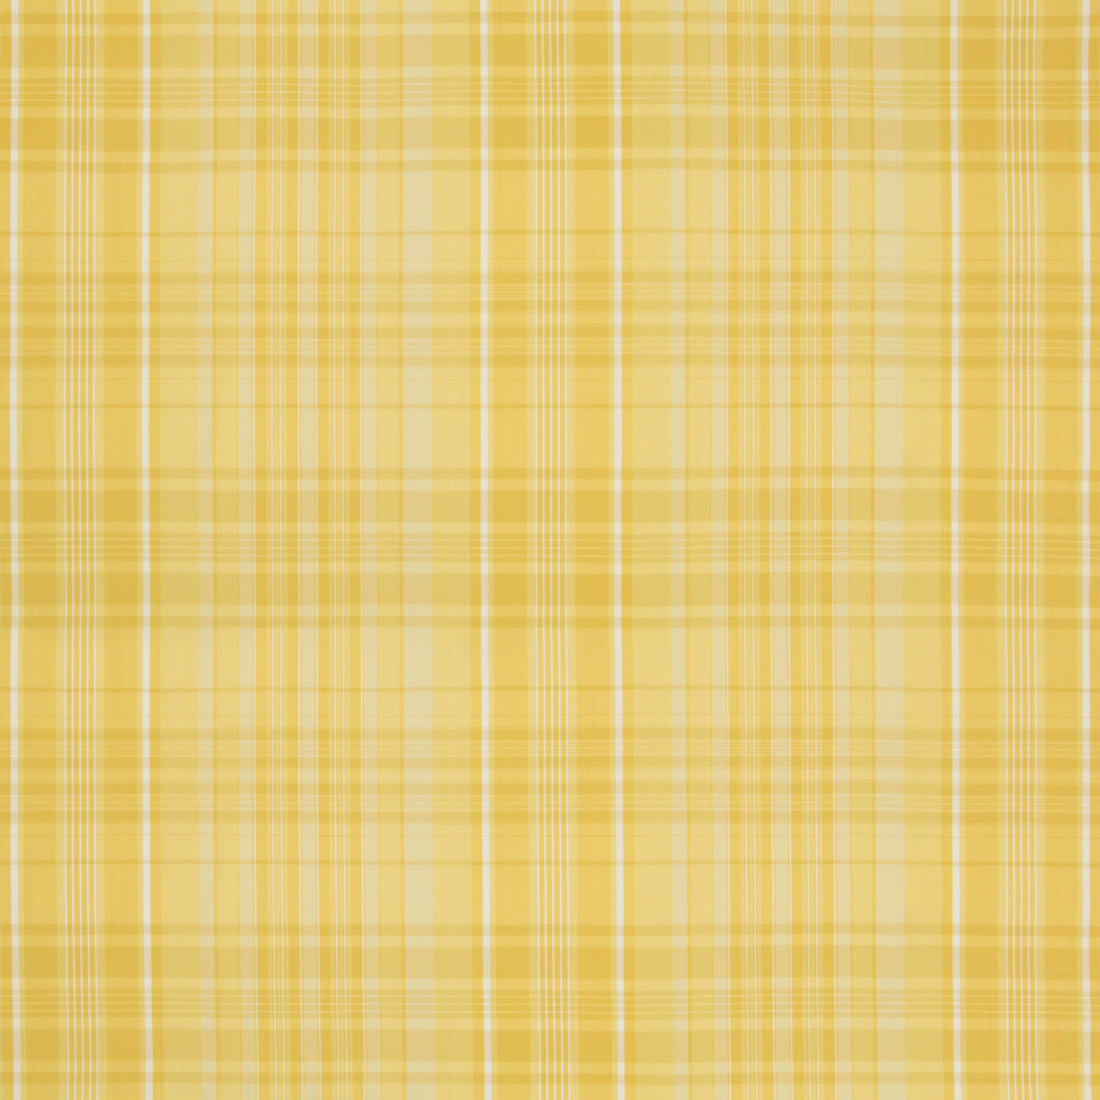 Guernsey Check fabric in yellow color - pattern 8019101.40.0 - by Brunschwig &amp; Fils in the Normant Checks And Stripes collection